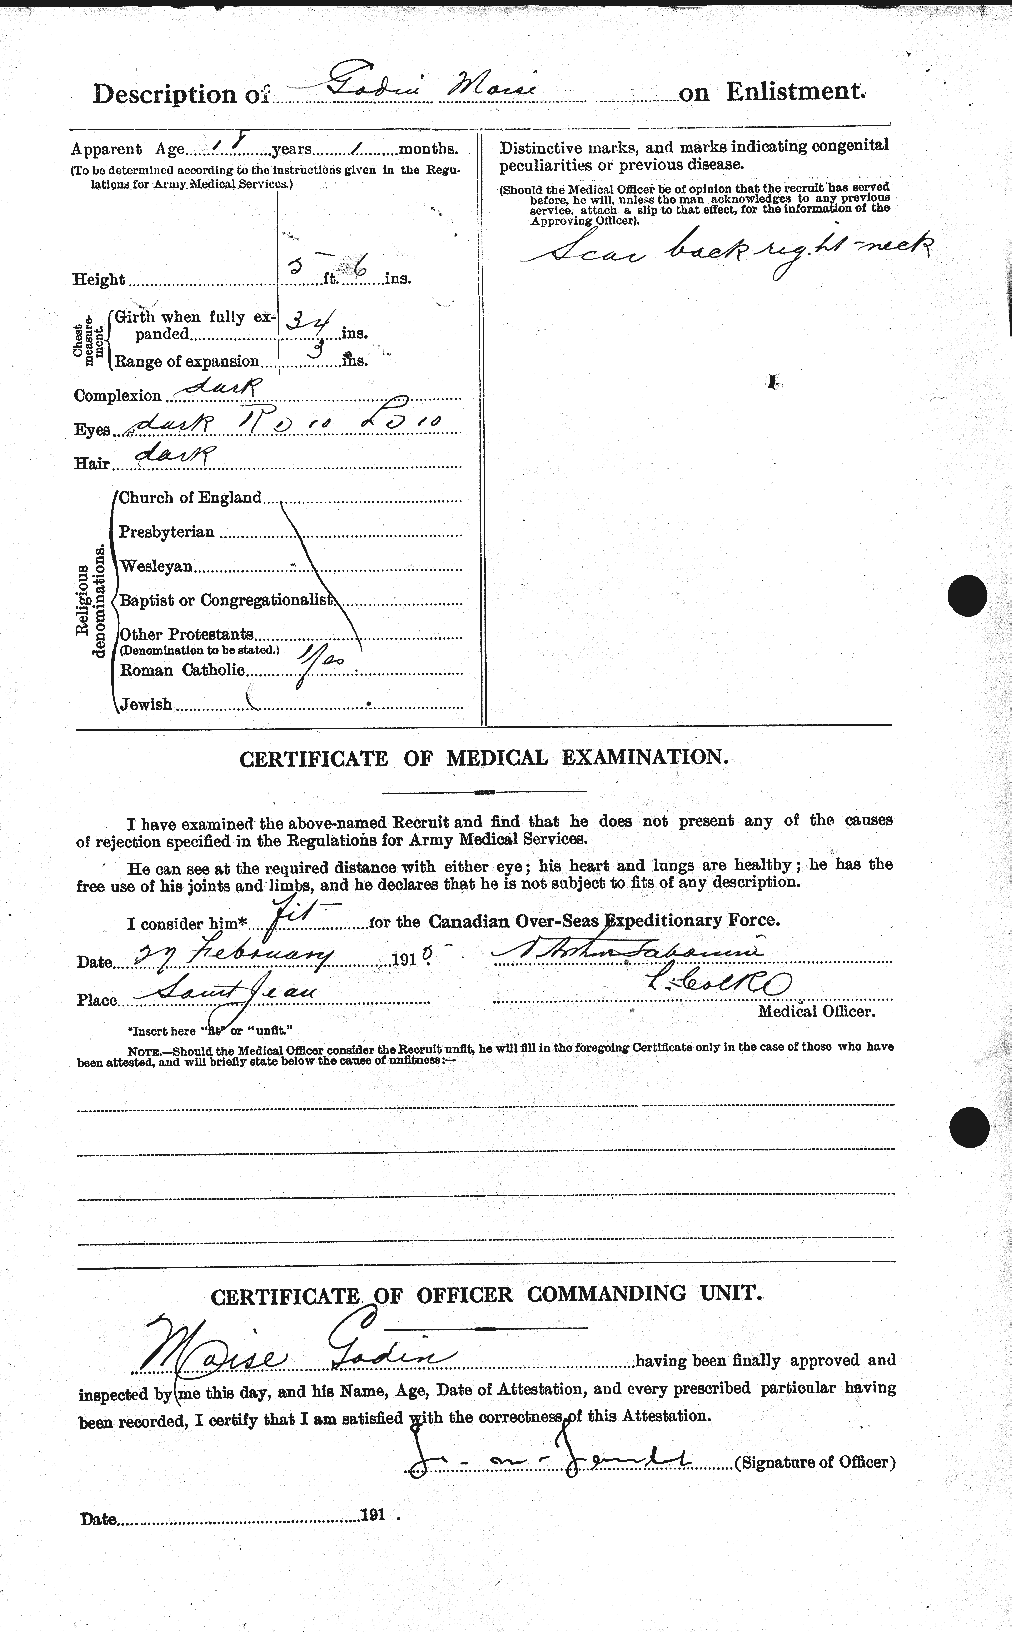 Personnel Records of the First World War - CEF 354555b